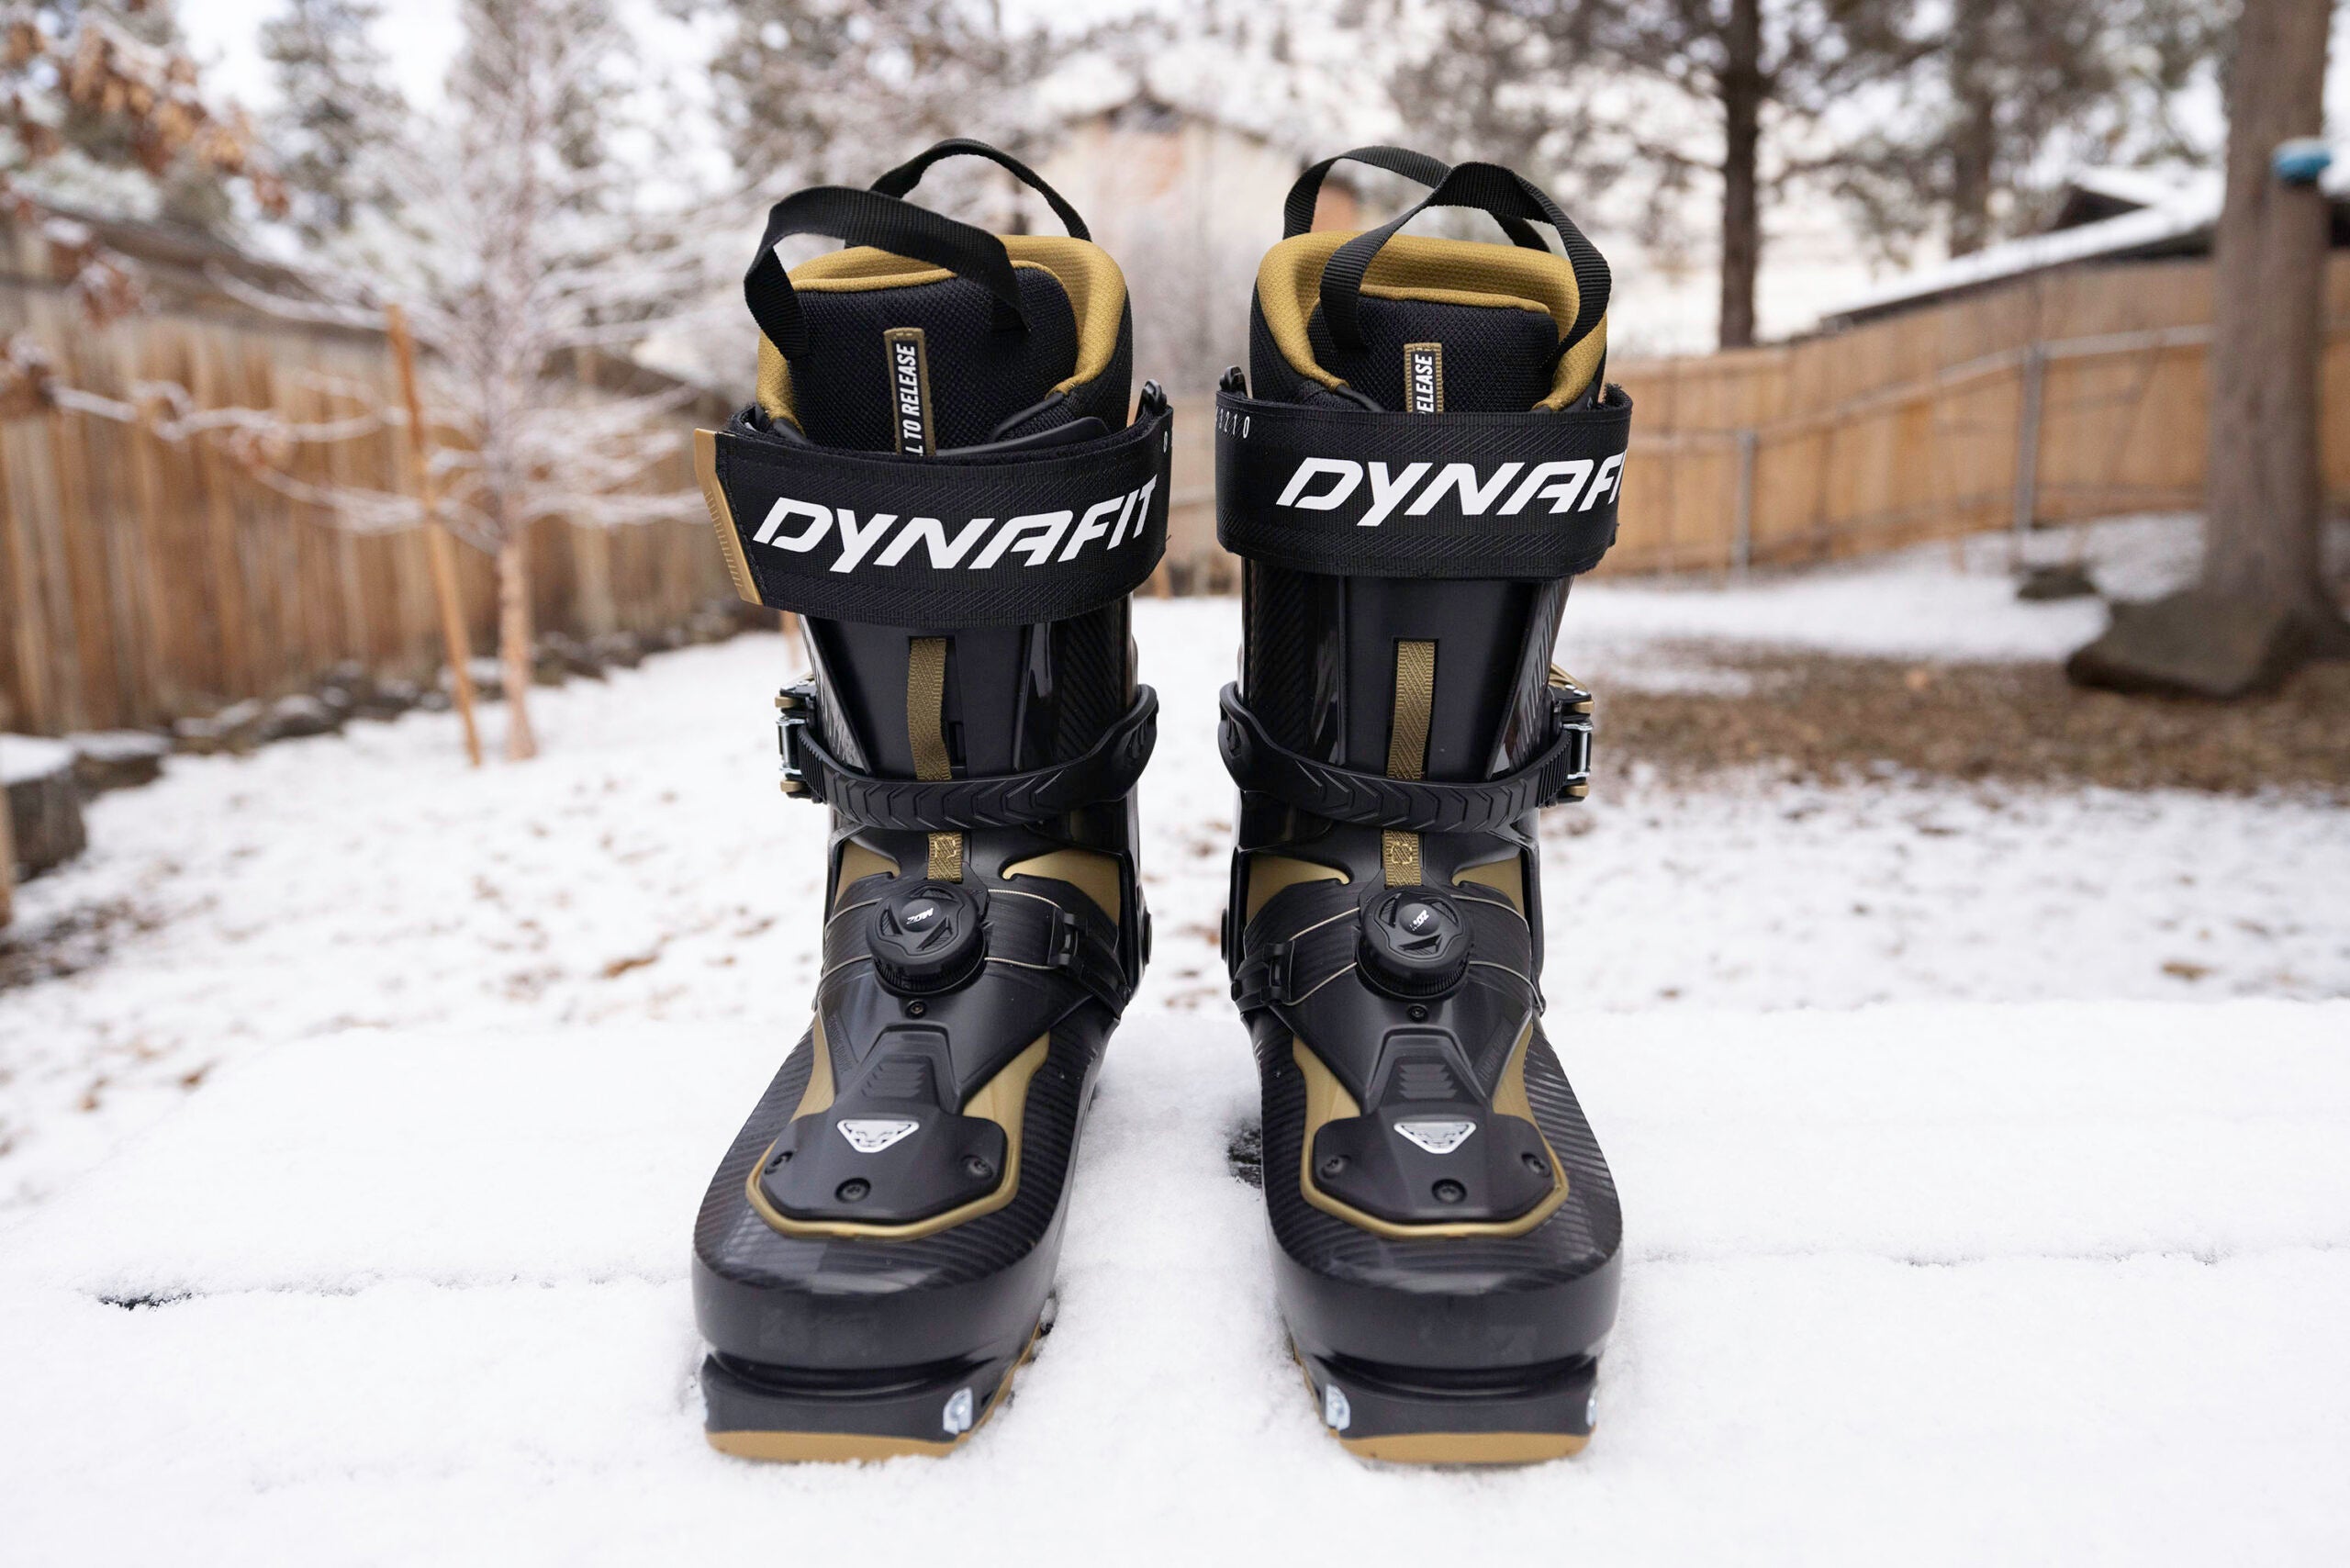 First Review of the Dynafit Ridge Pro Backcountry Boot